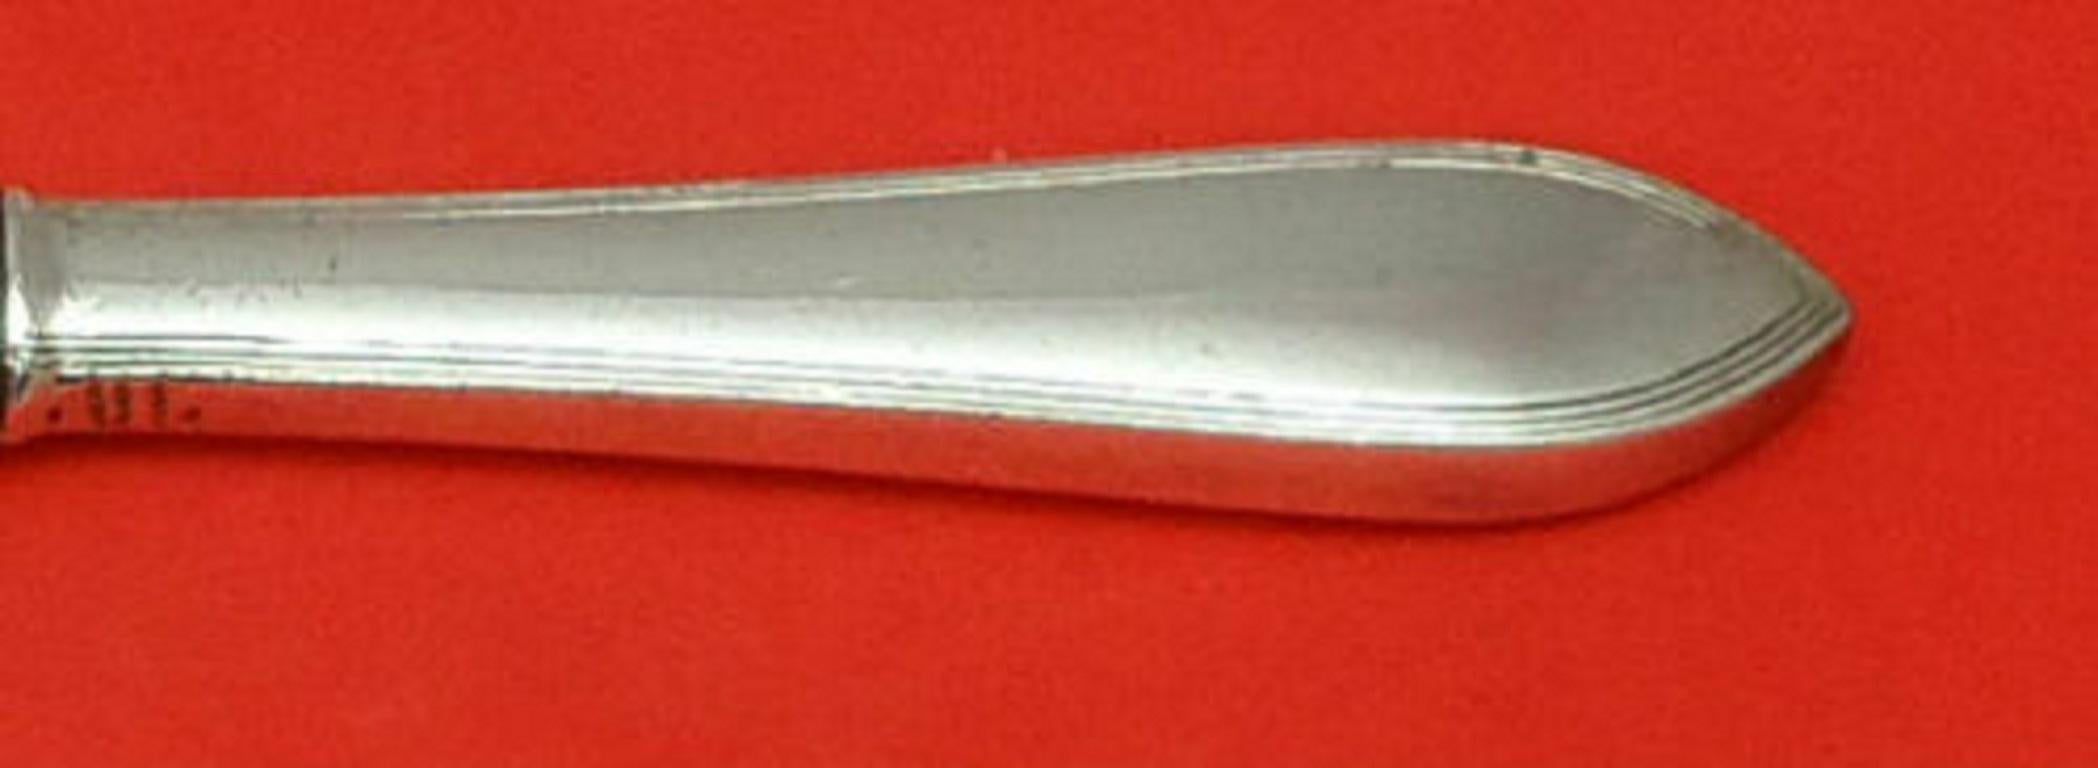 Sterling silver hollow handle with blunt blade regular knife, 9 1/2